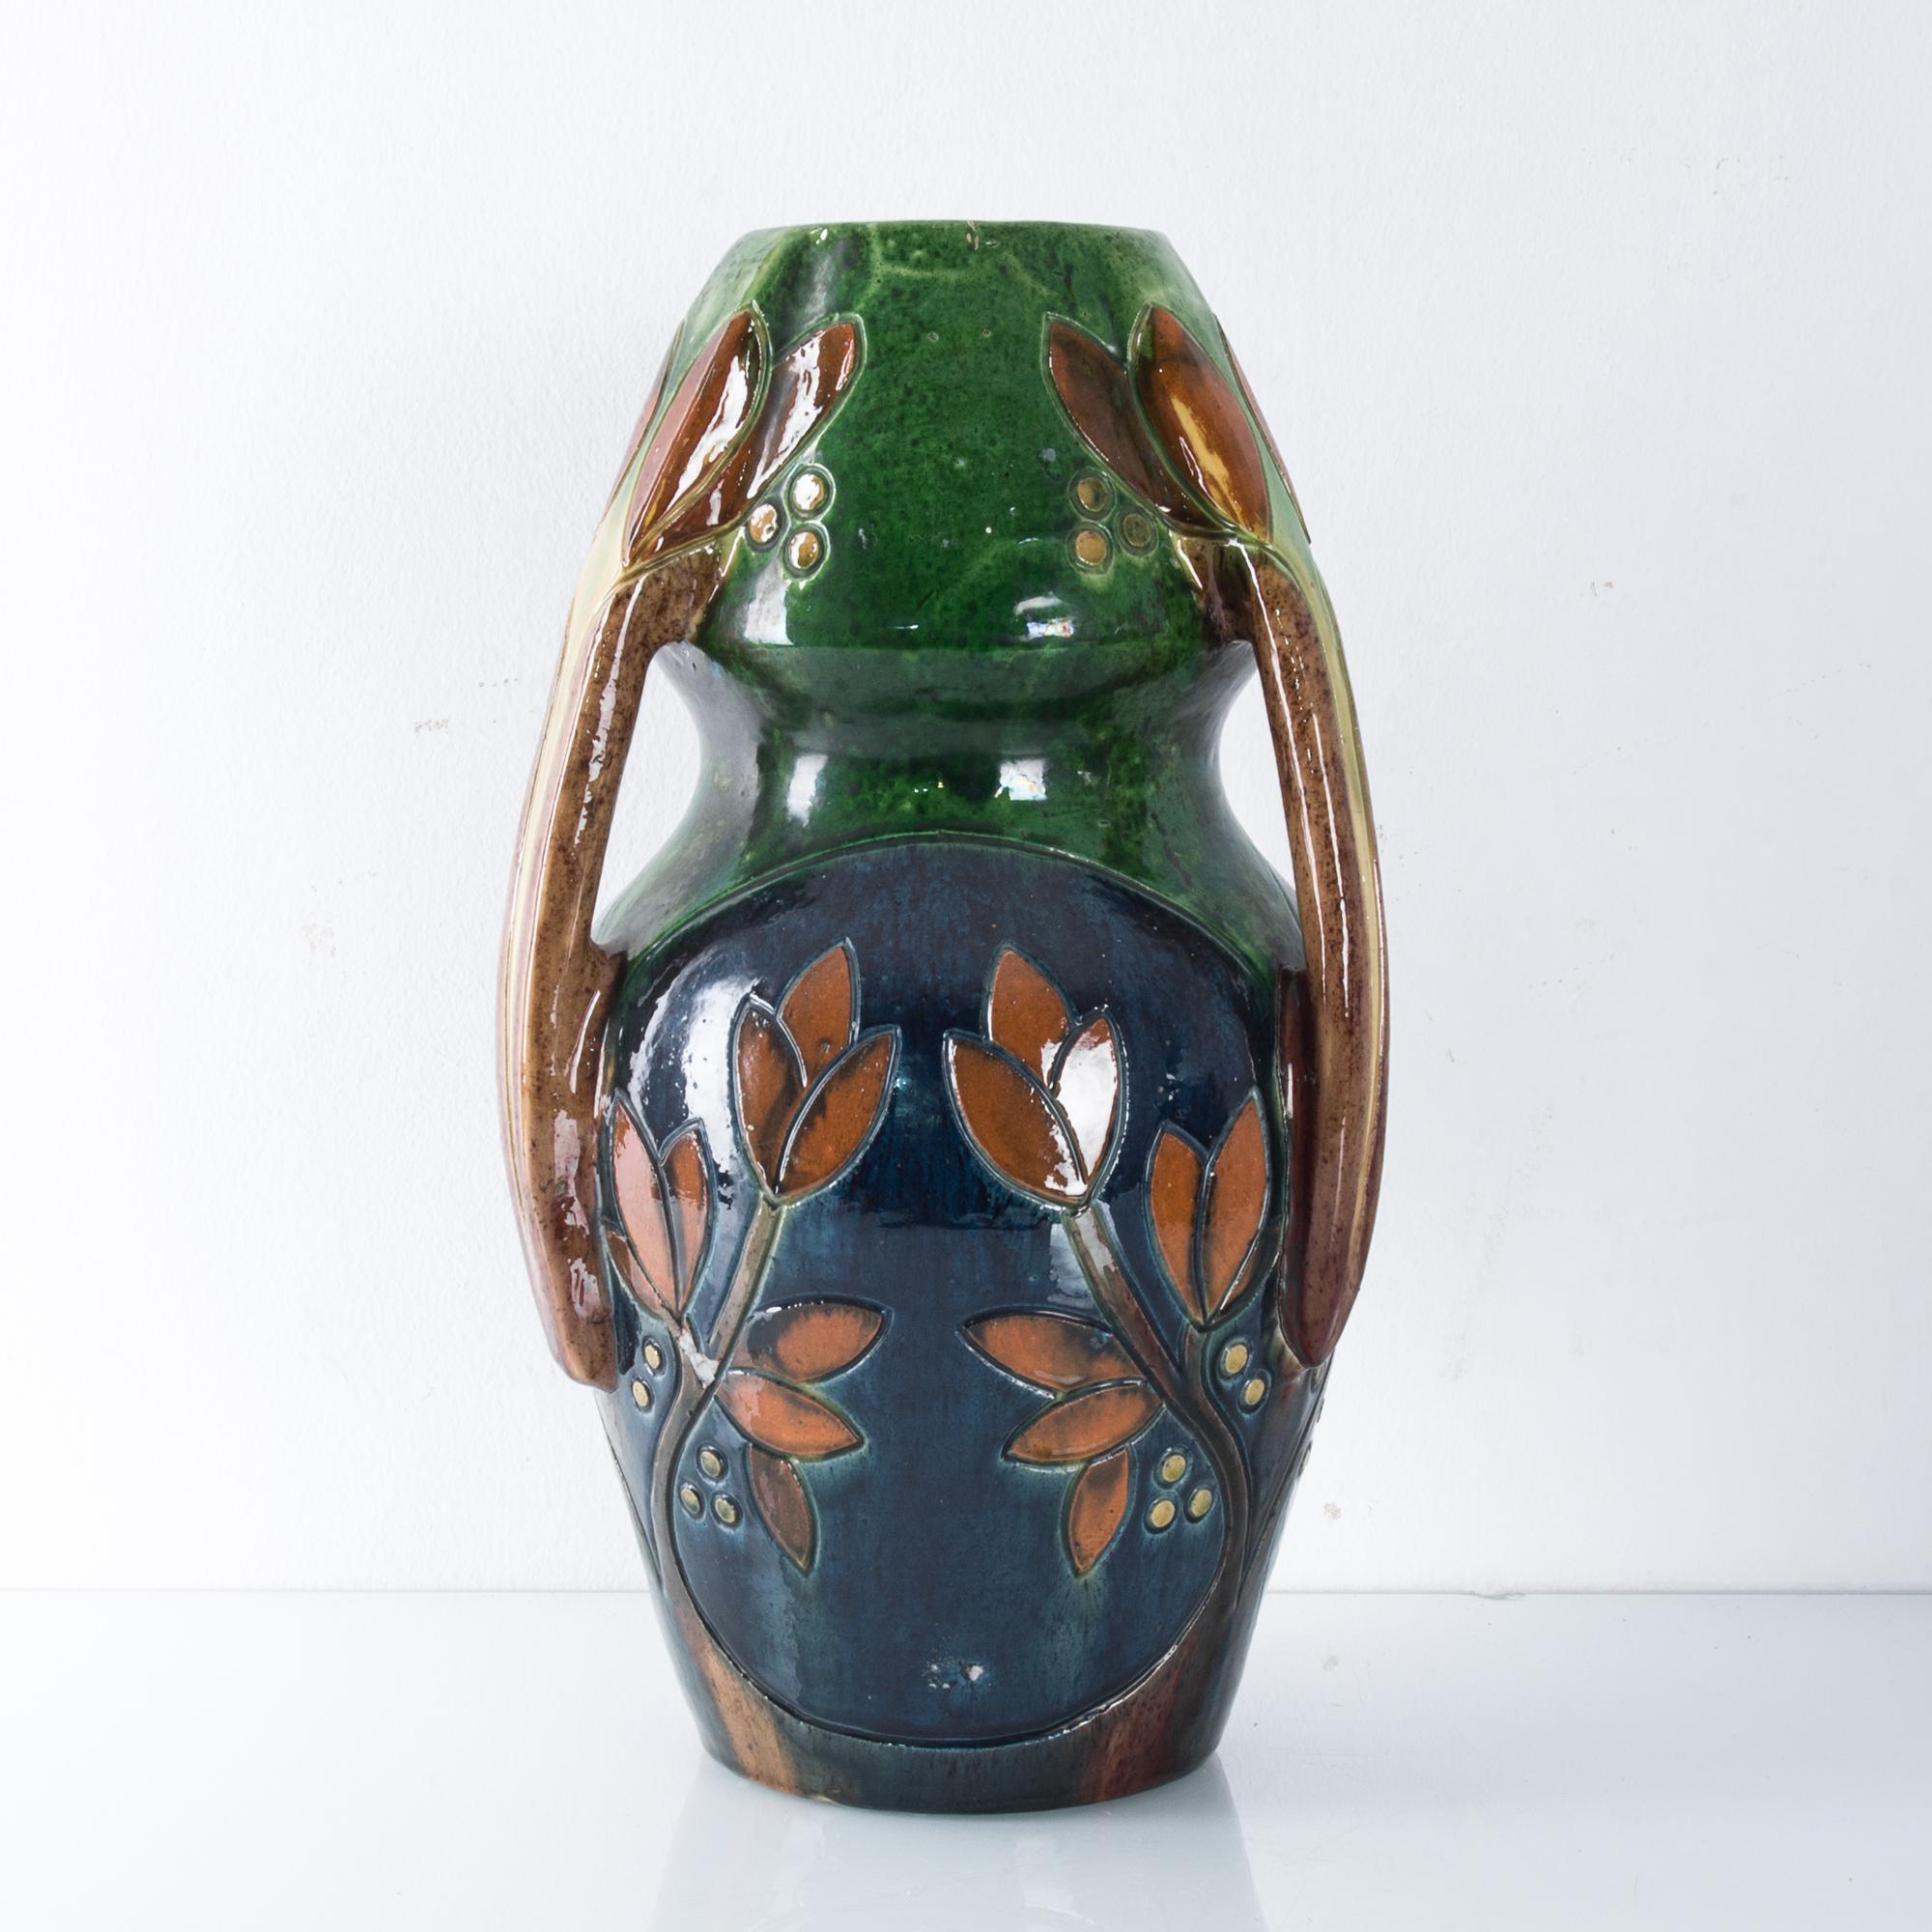 A ceramic vase from Germany, circa 1960. A leafy pattern is realized in a palette of cobalt blue, forest green and terracotta brown. The branches of the leaves extend to form handles, giving the vase a three-fold symmetry. The shape is wasp-waisted;